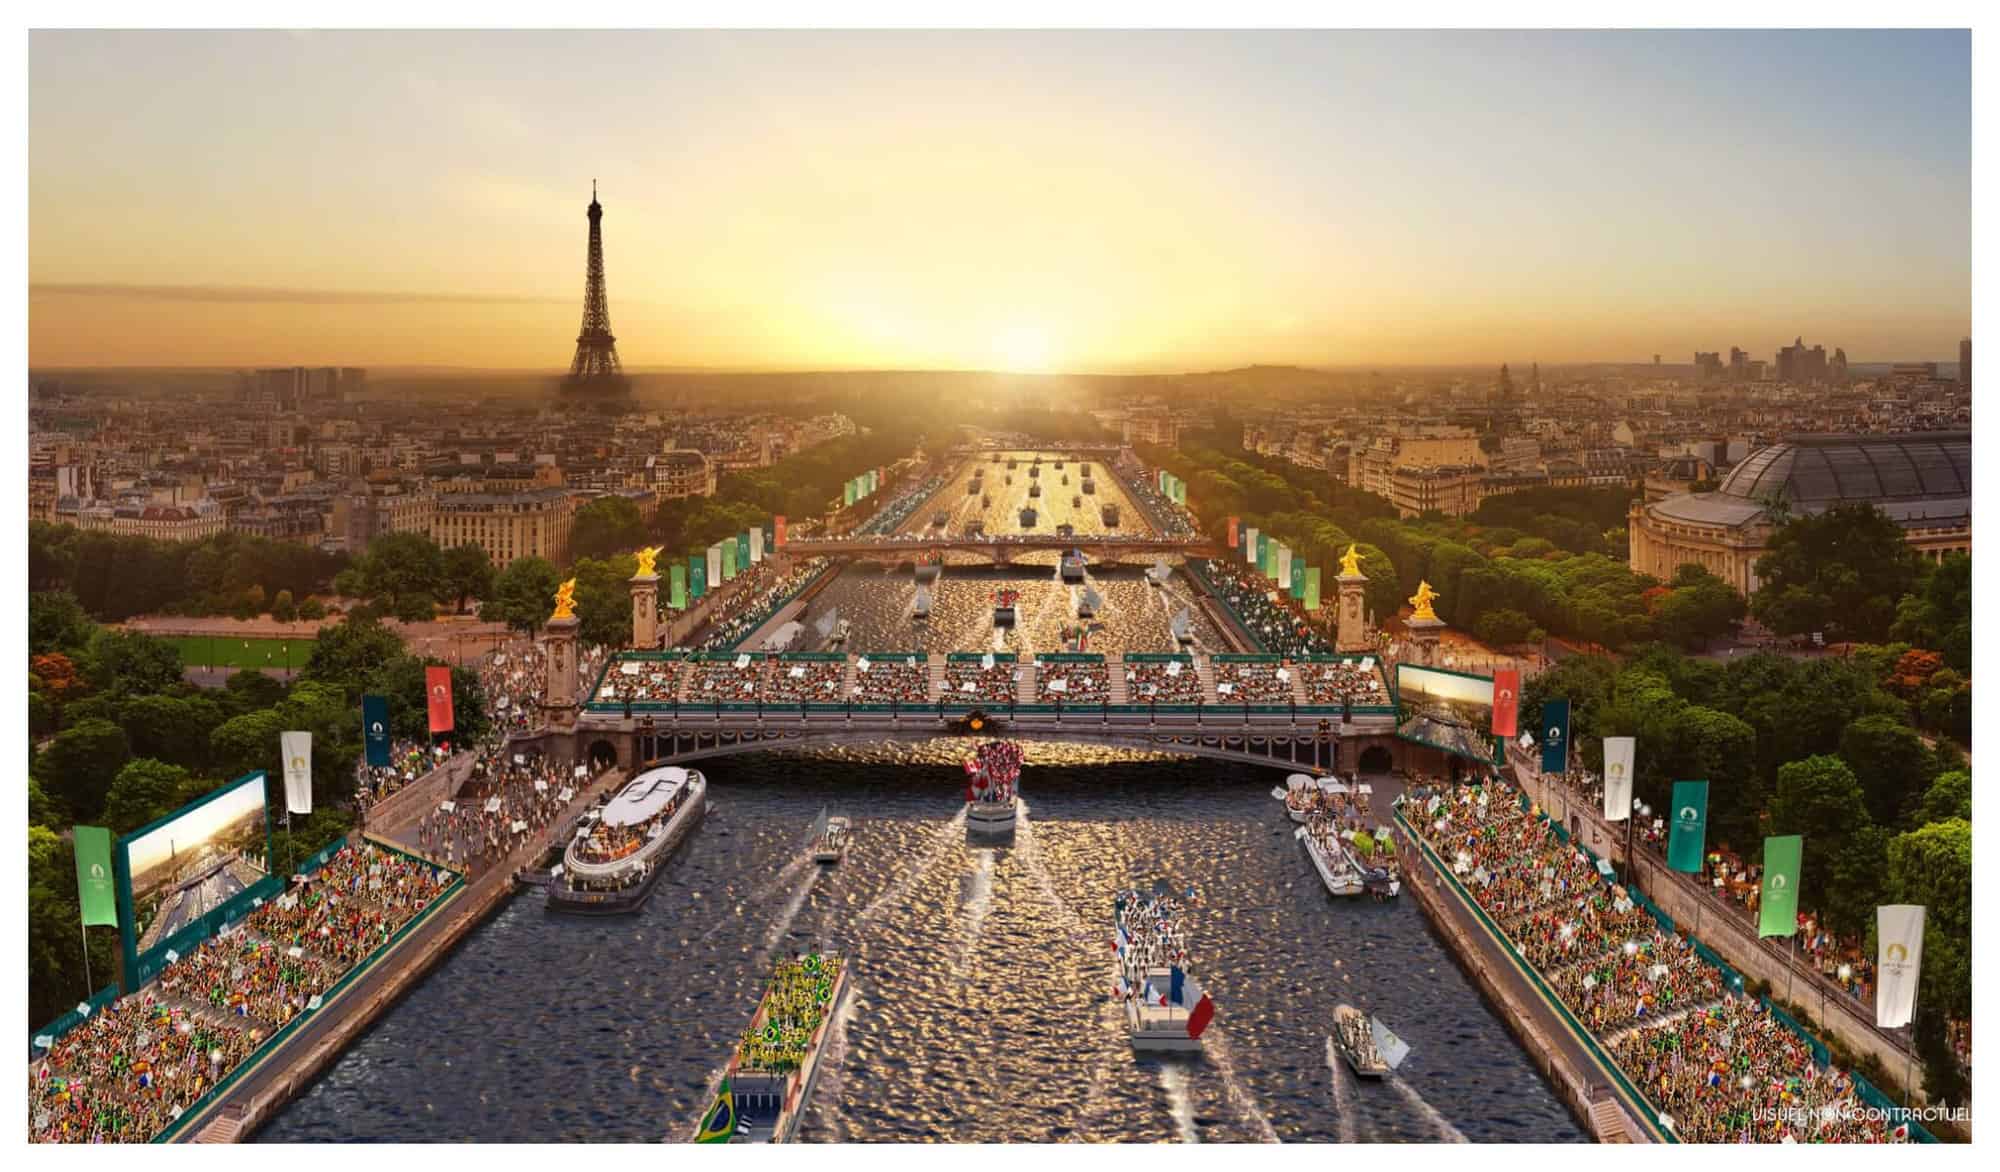 The Paris 2024 Olympic and Paralympic Games: Everything you need to know